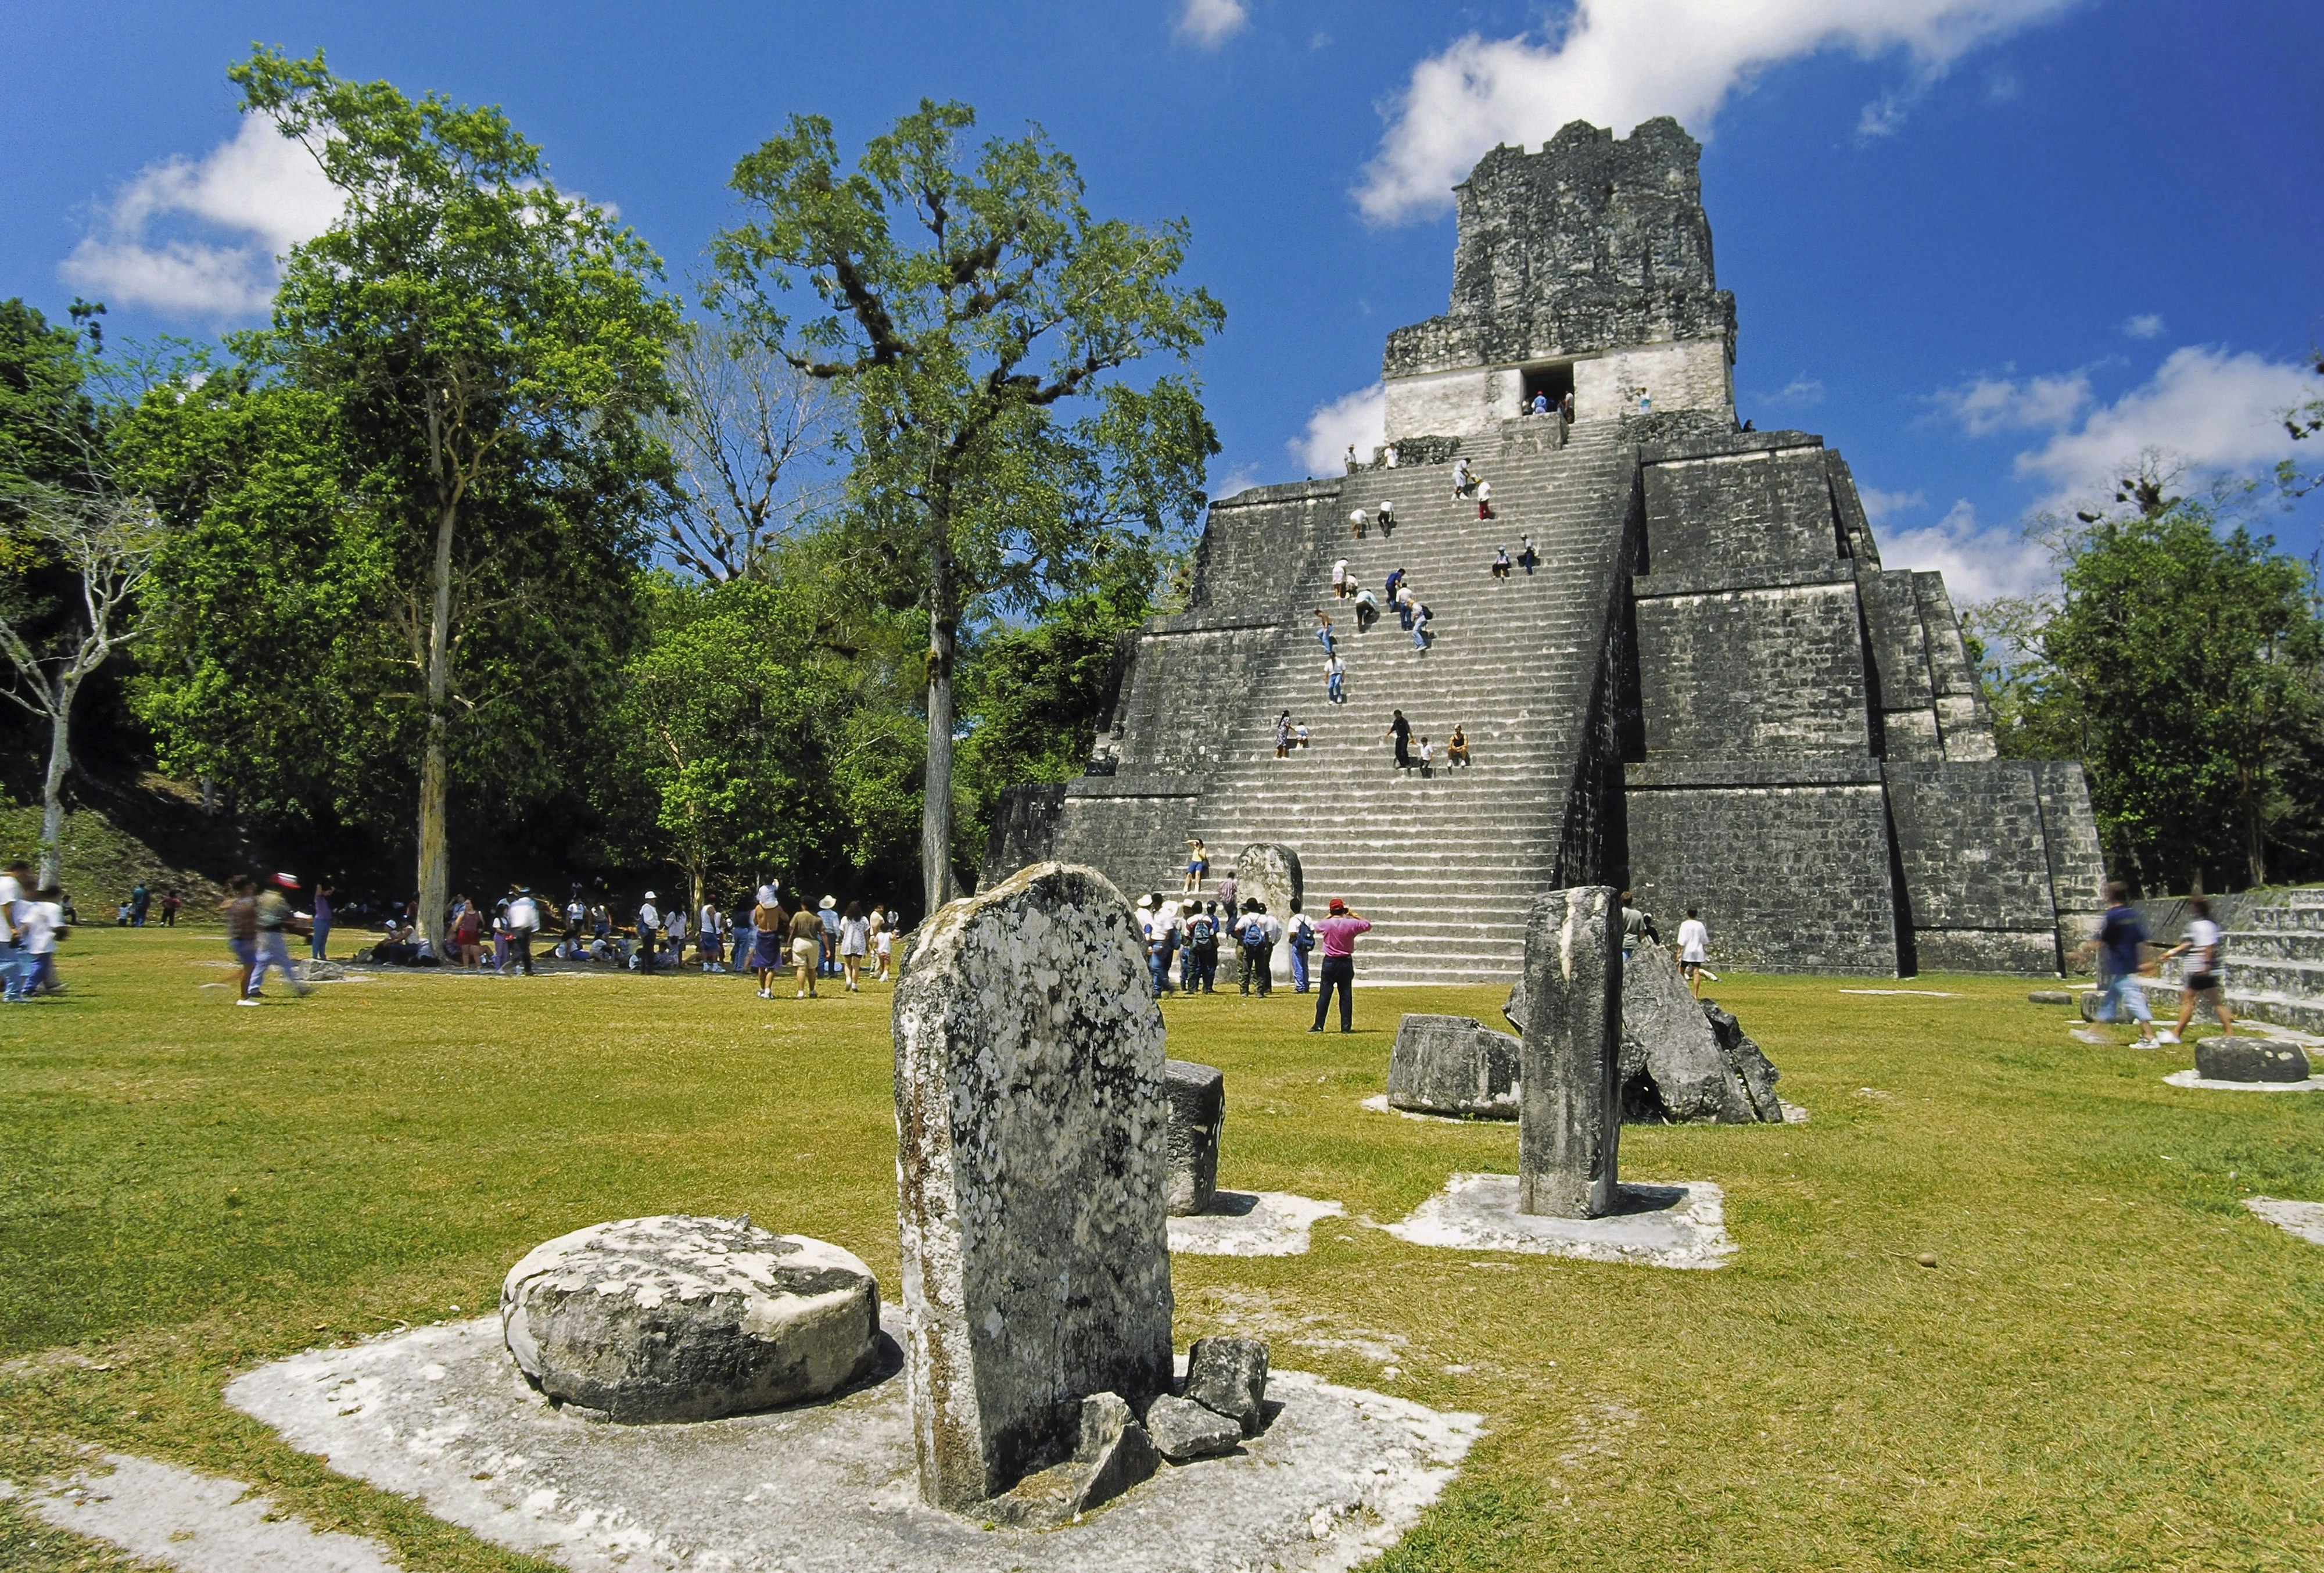 A large group of people ascend the stairs to a Mayan temple at the Tikal in Guatemala. Stone structures dot the green concourse. 